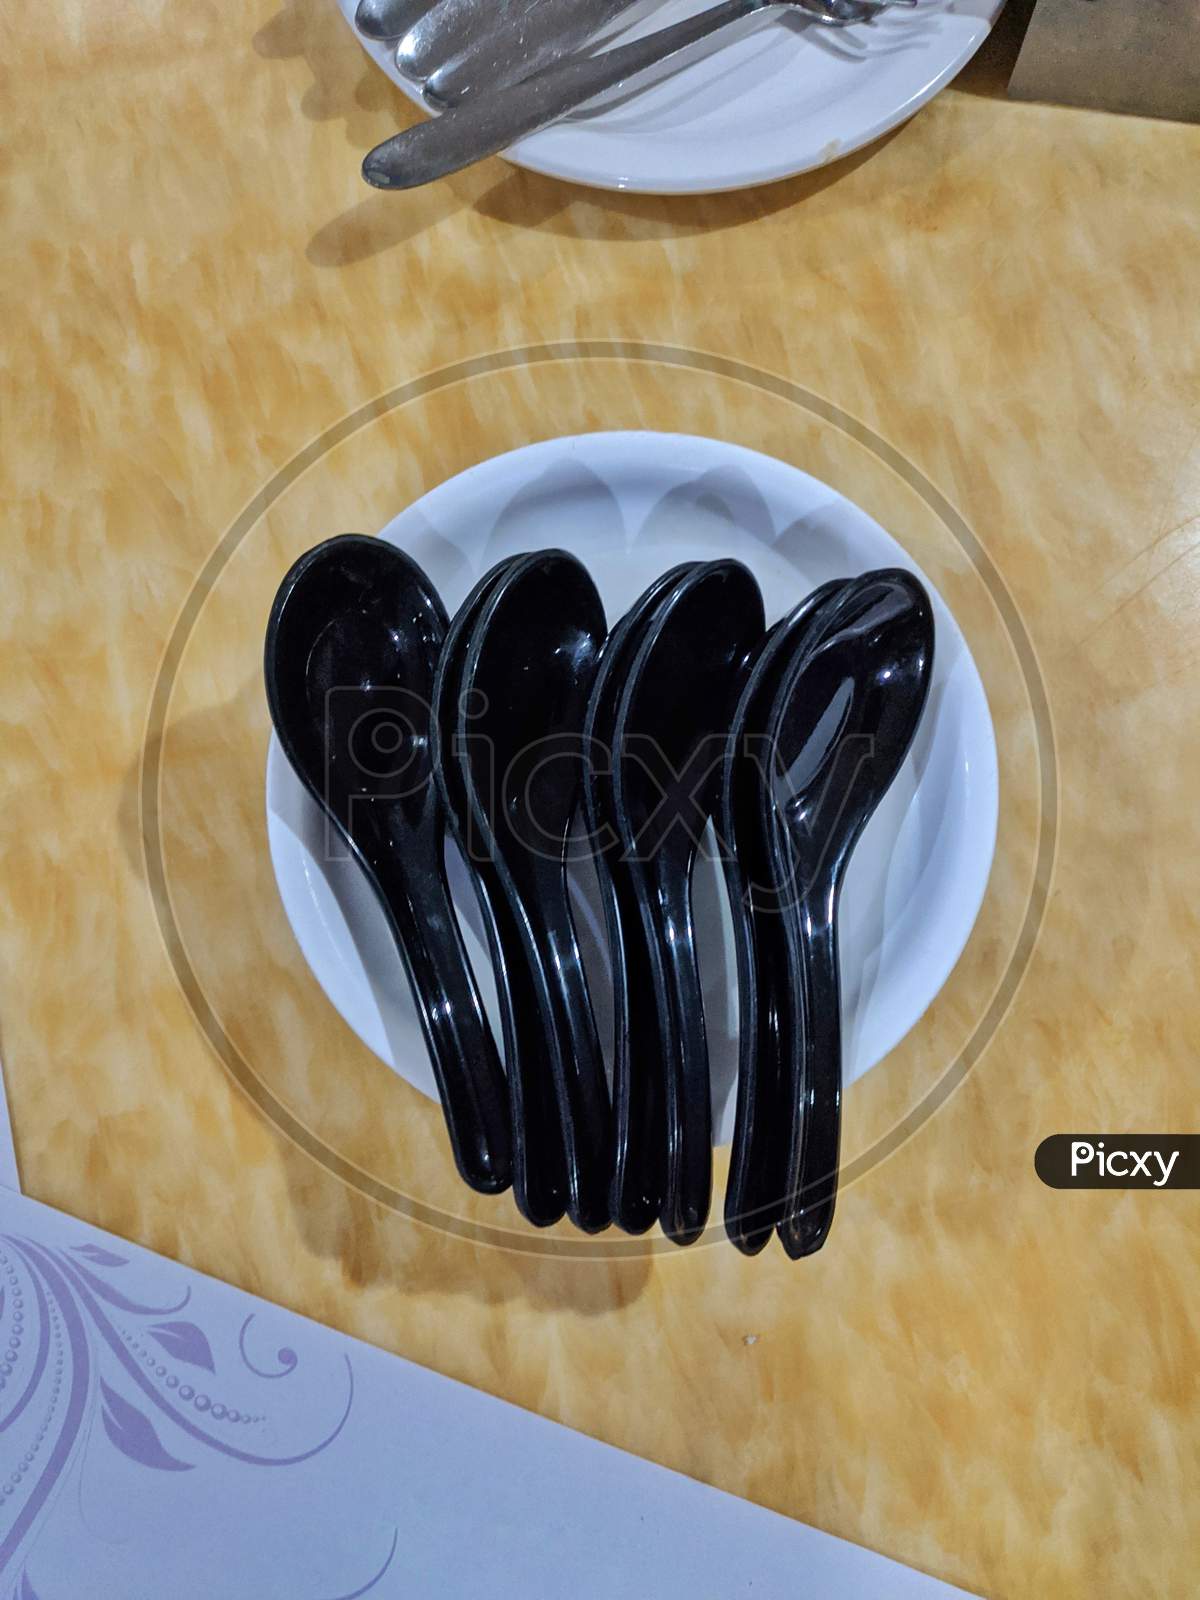 Couple Of Black Spoons On White Plate In Yellow Background